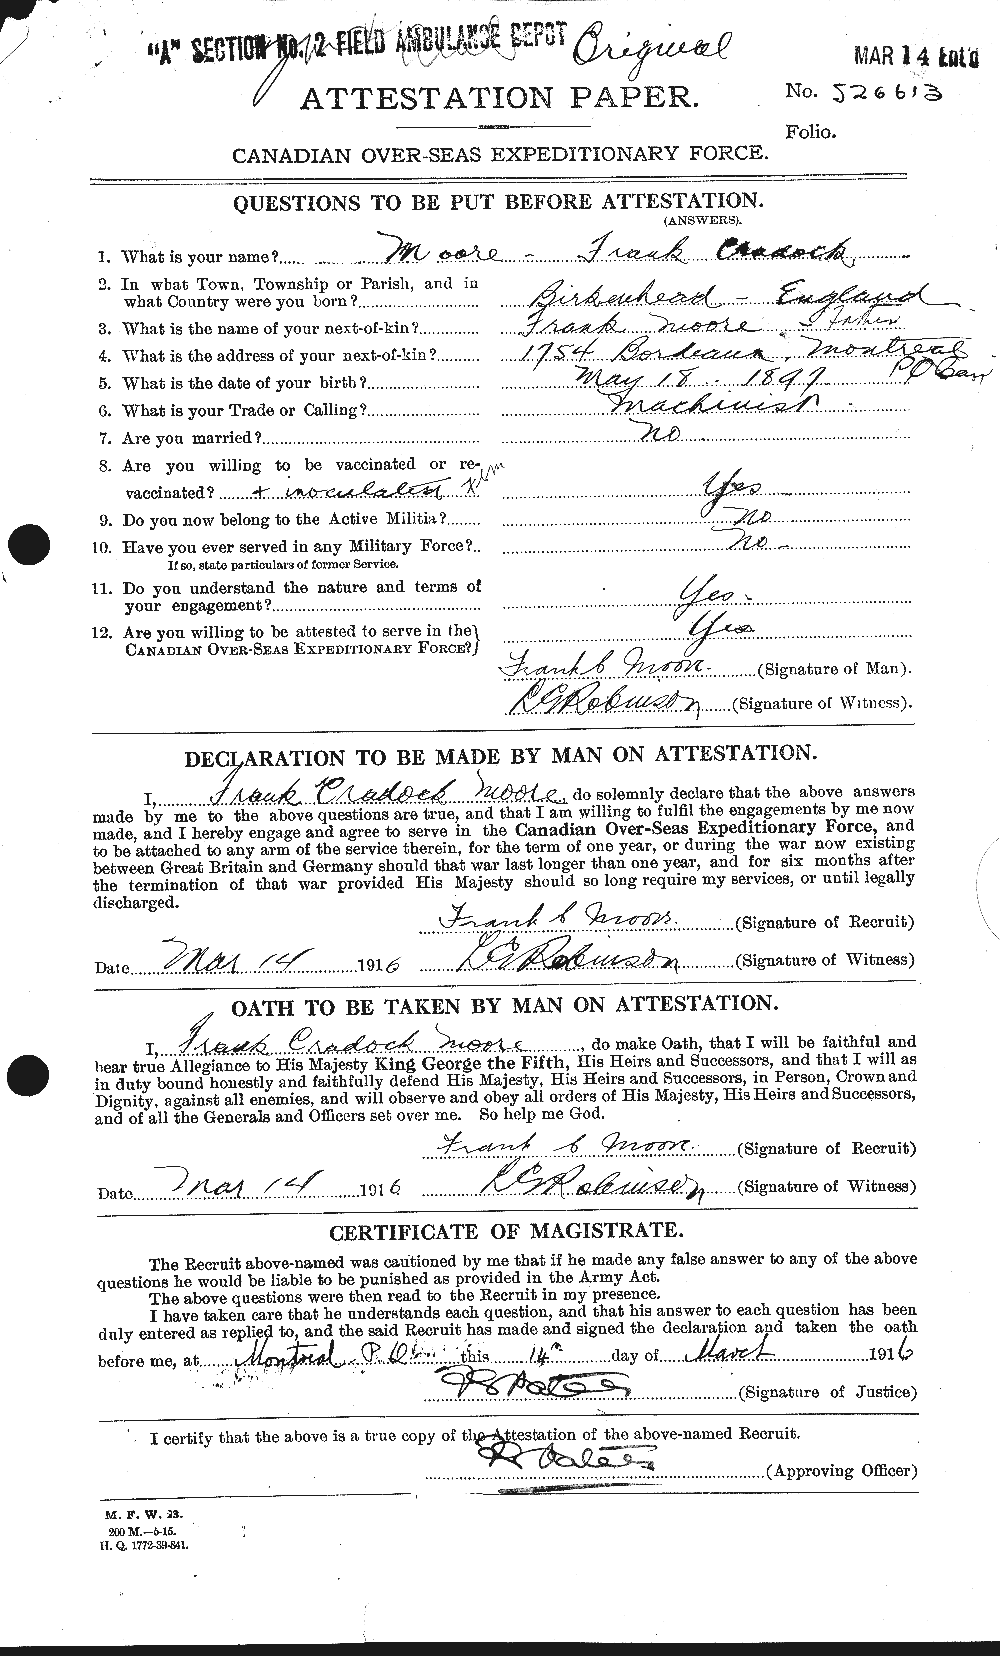 Personnel Records of the First World War - CEF 506699a